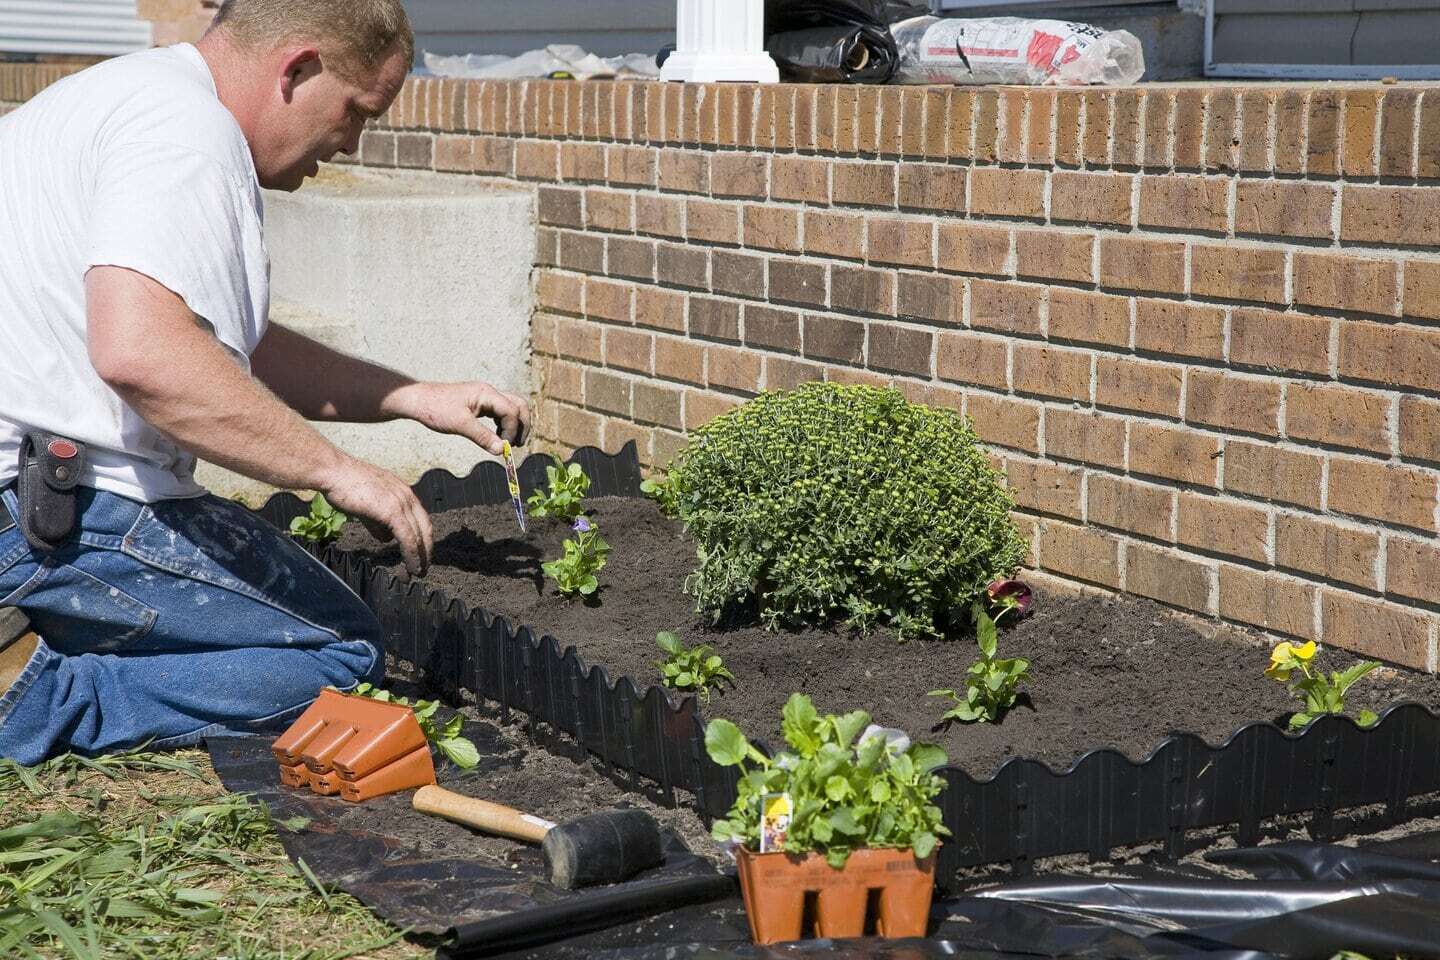 How to Set Up a Gardening Business